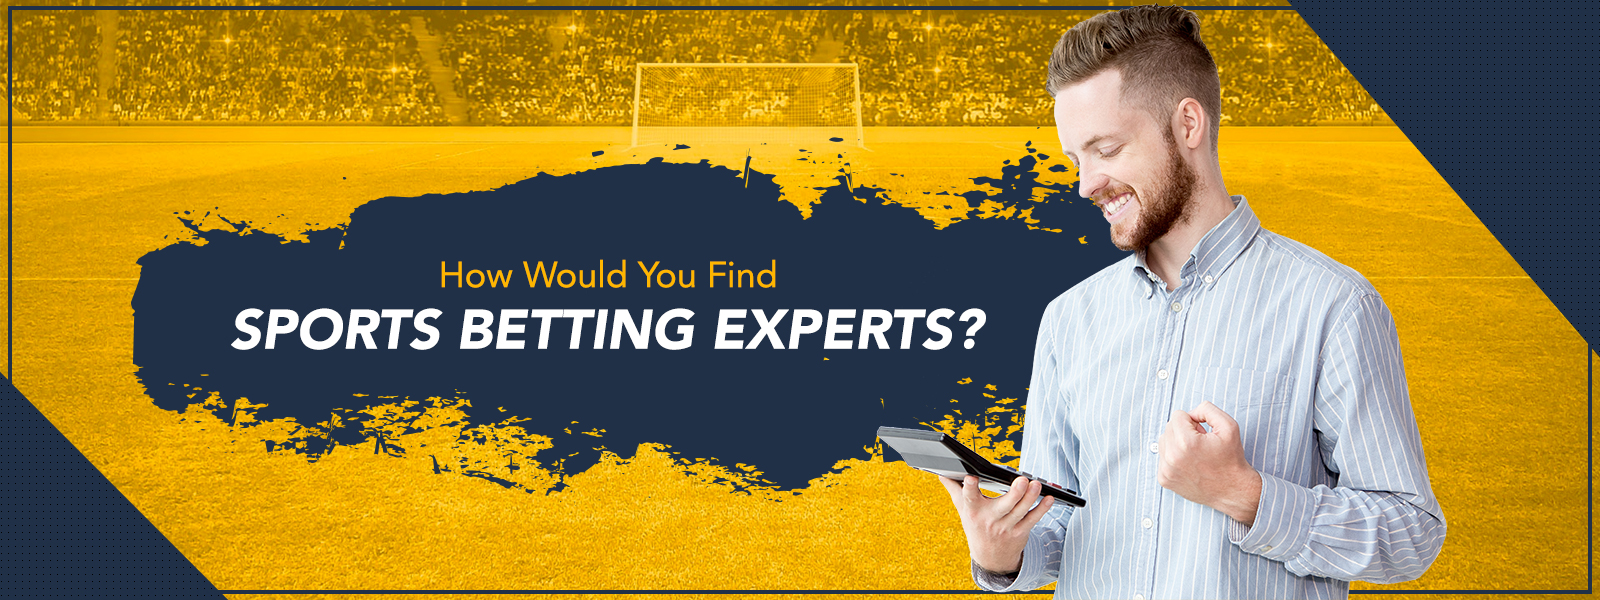 How Would You Find Sports Betting Experts?